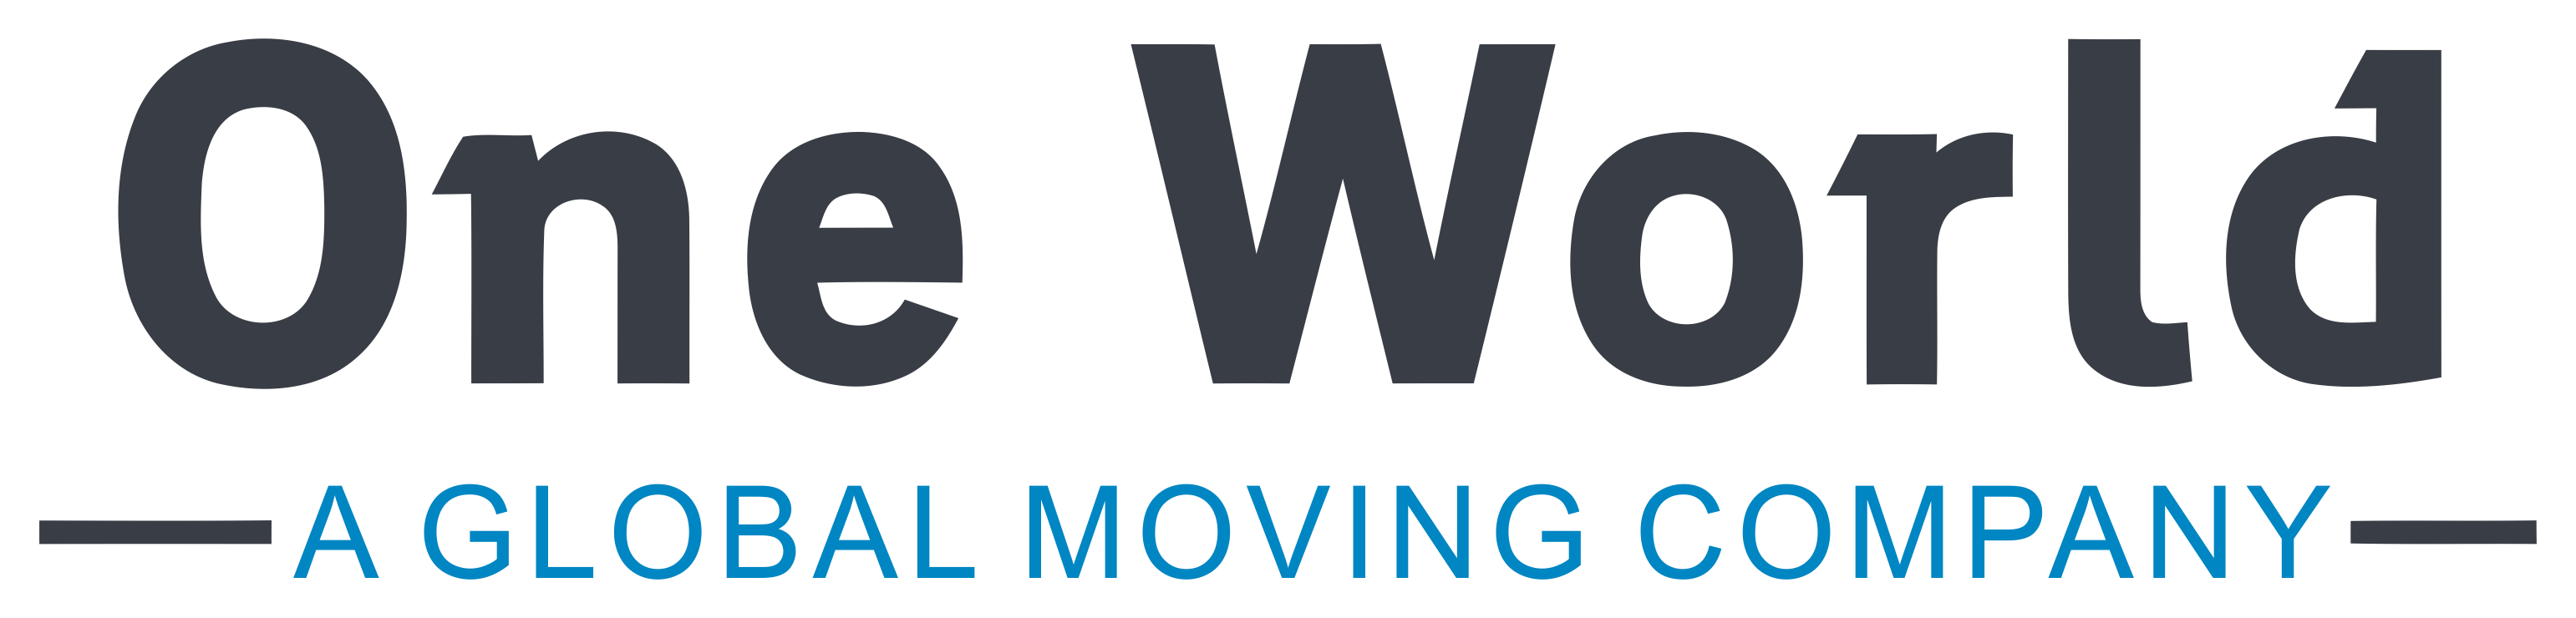 #1 Data Center Relocation | Office Movers & Company Moves | Oneworld Logix